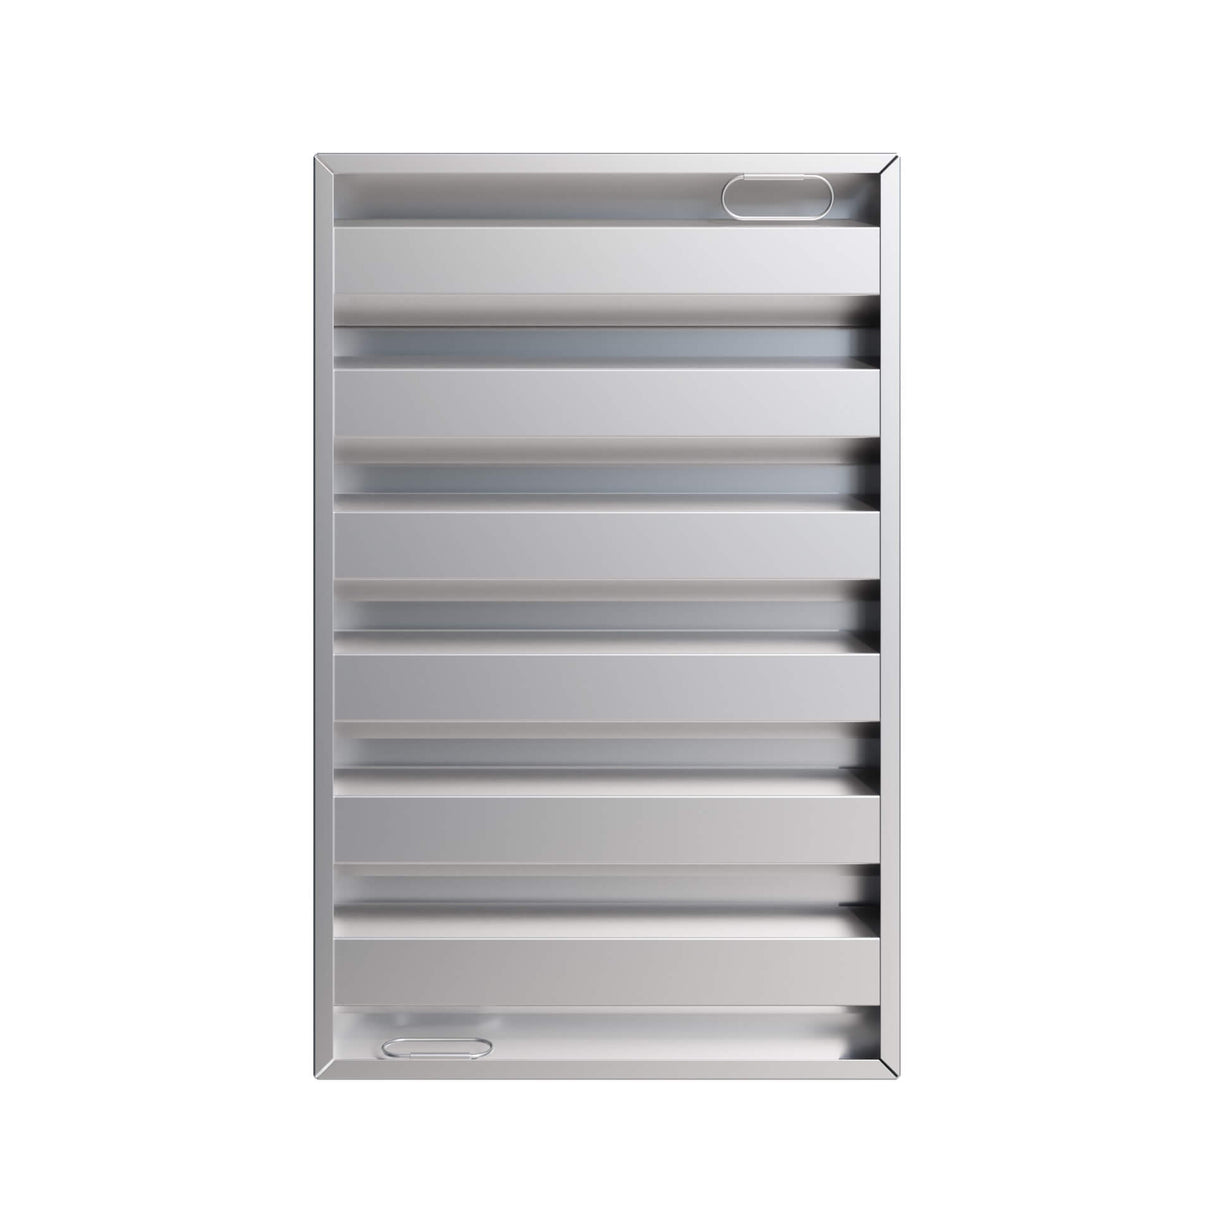 Empire Canopy Grease Baffle Stainless Steel Filter - A01934